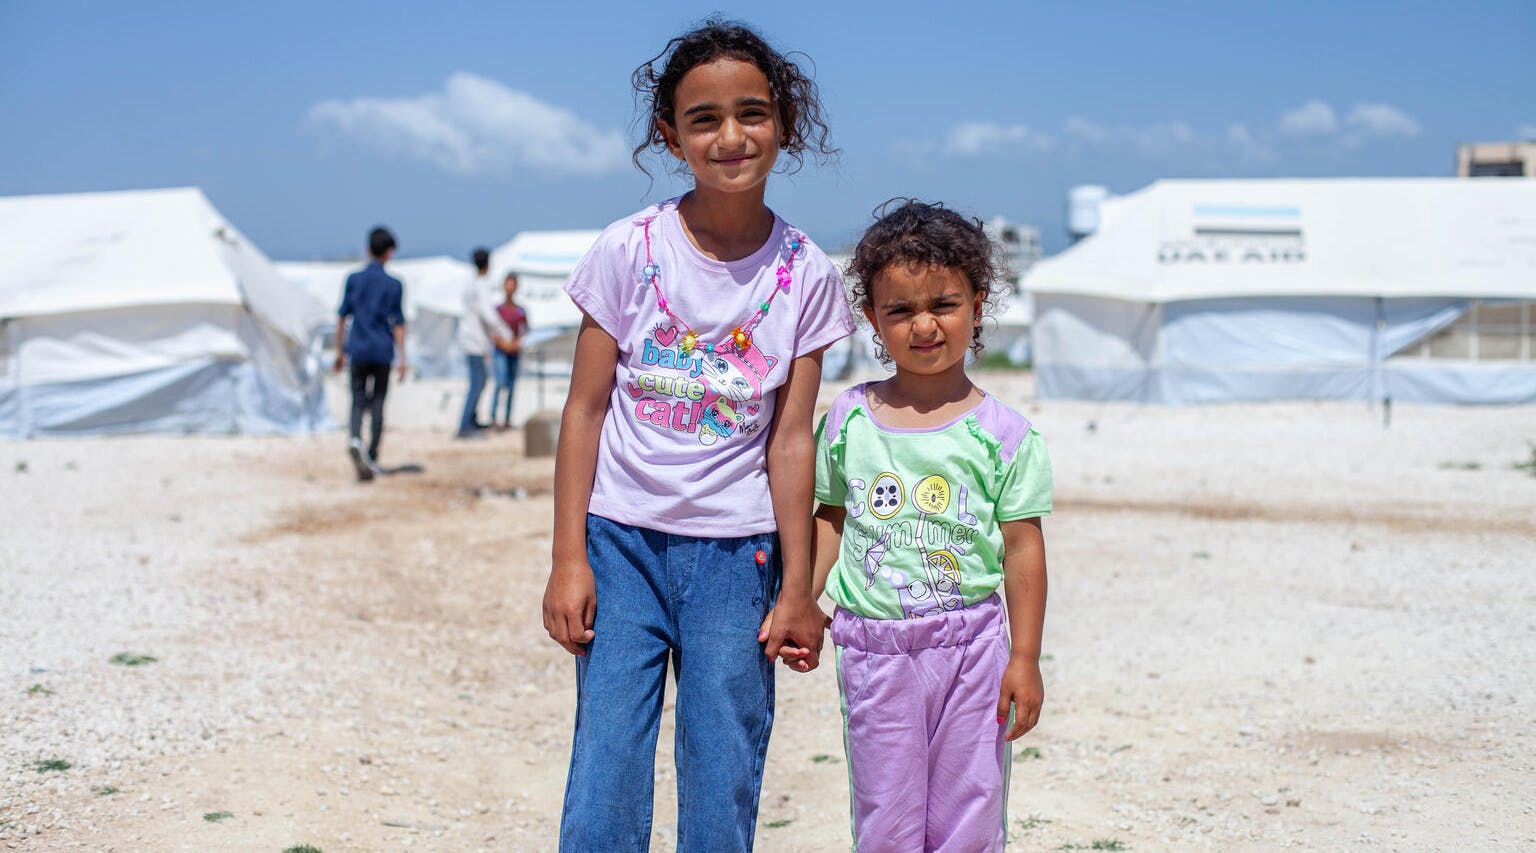 Türkiye-Syria Earthquake Emergency, Two girls in new clothes, distributed by UNICEF at a camp sheltering earthquake-displaced families in Jableh city, Lattakia, Syria. 